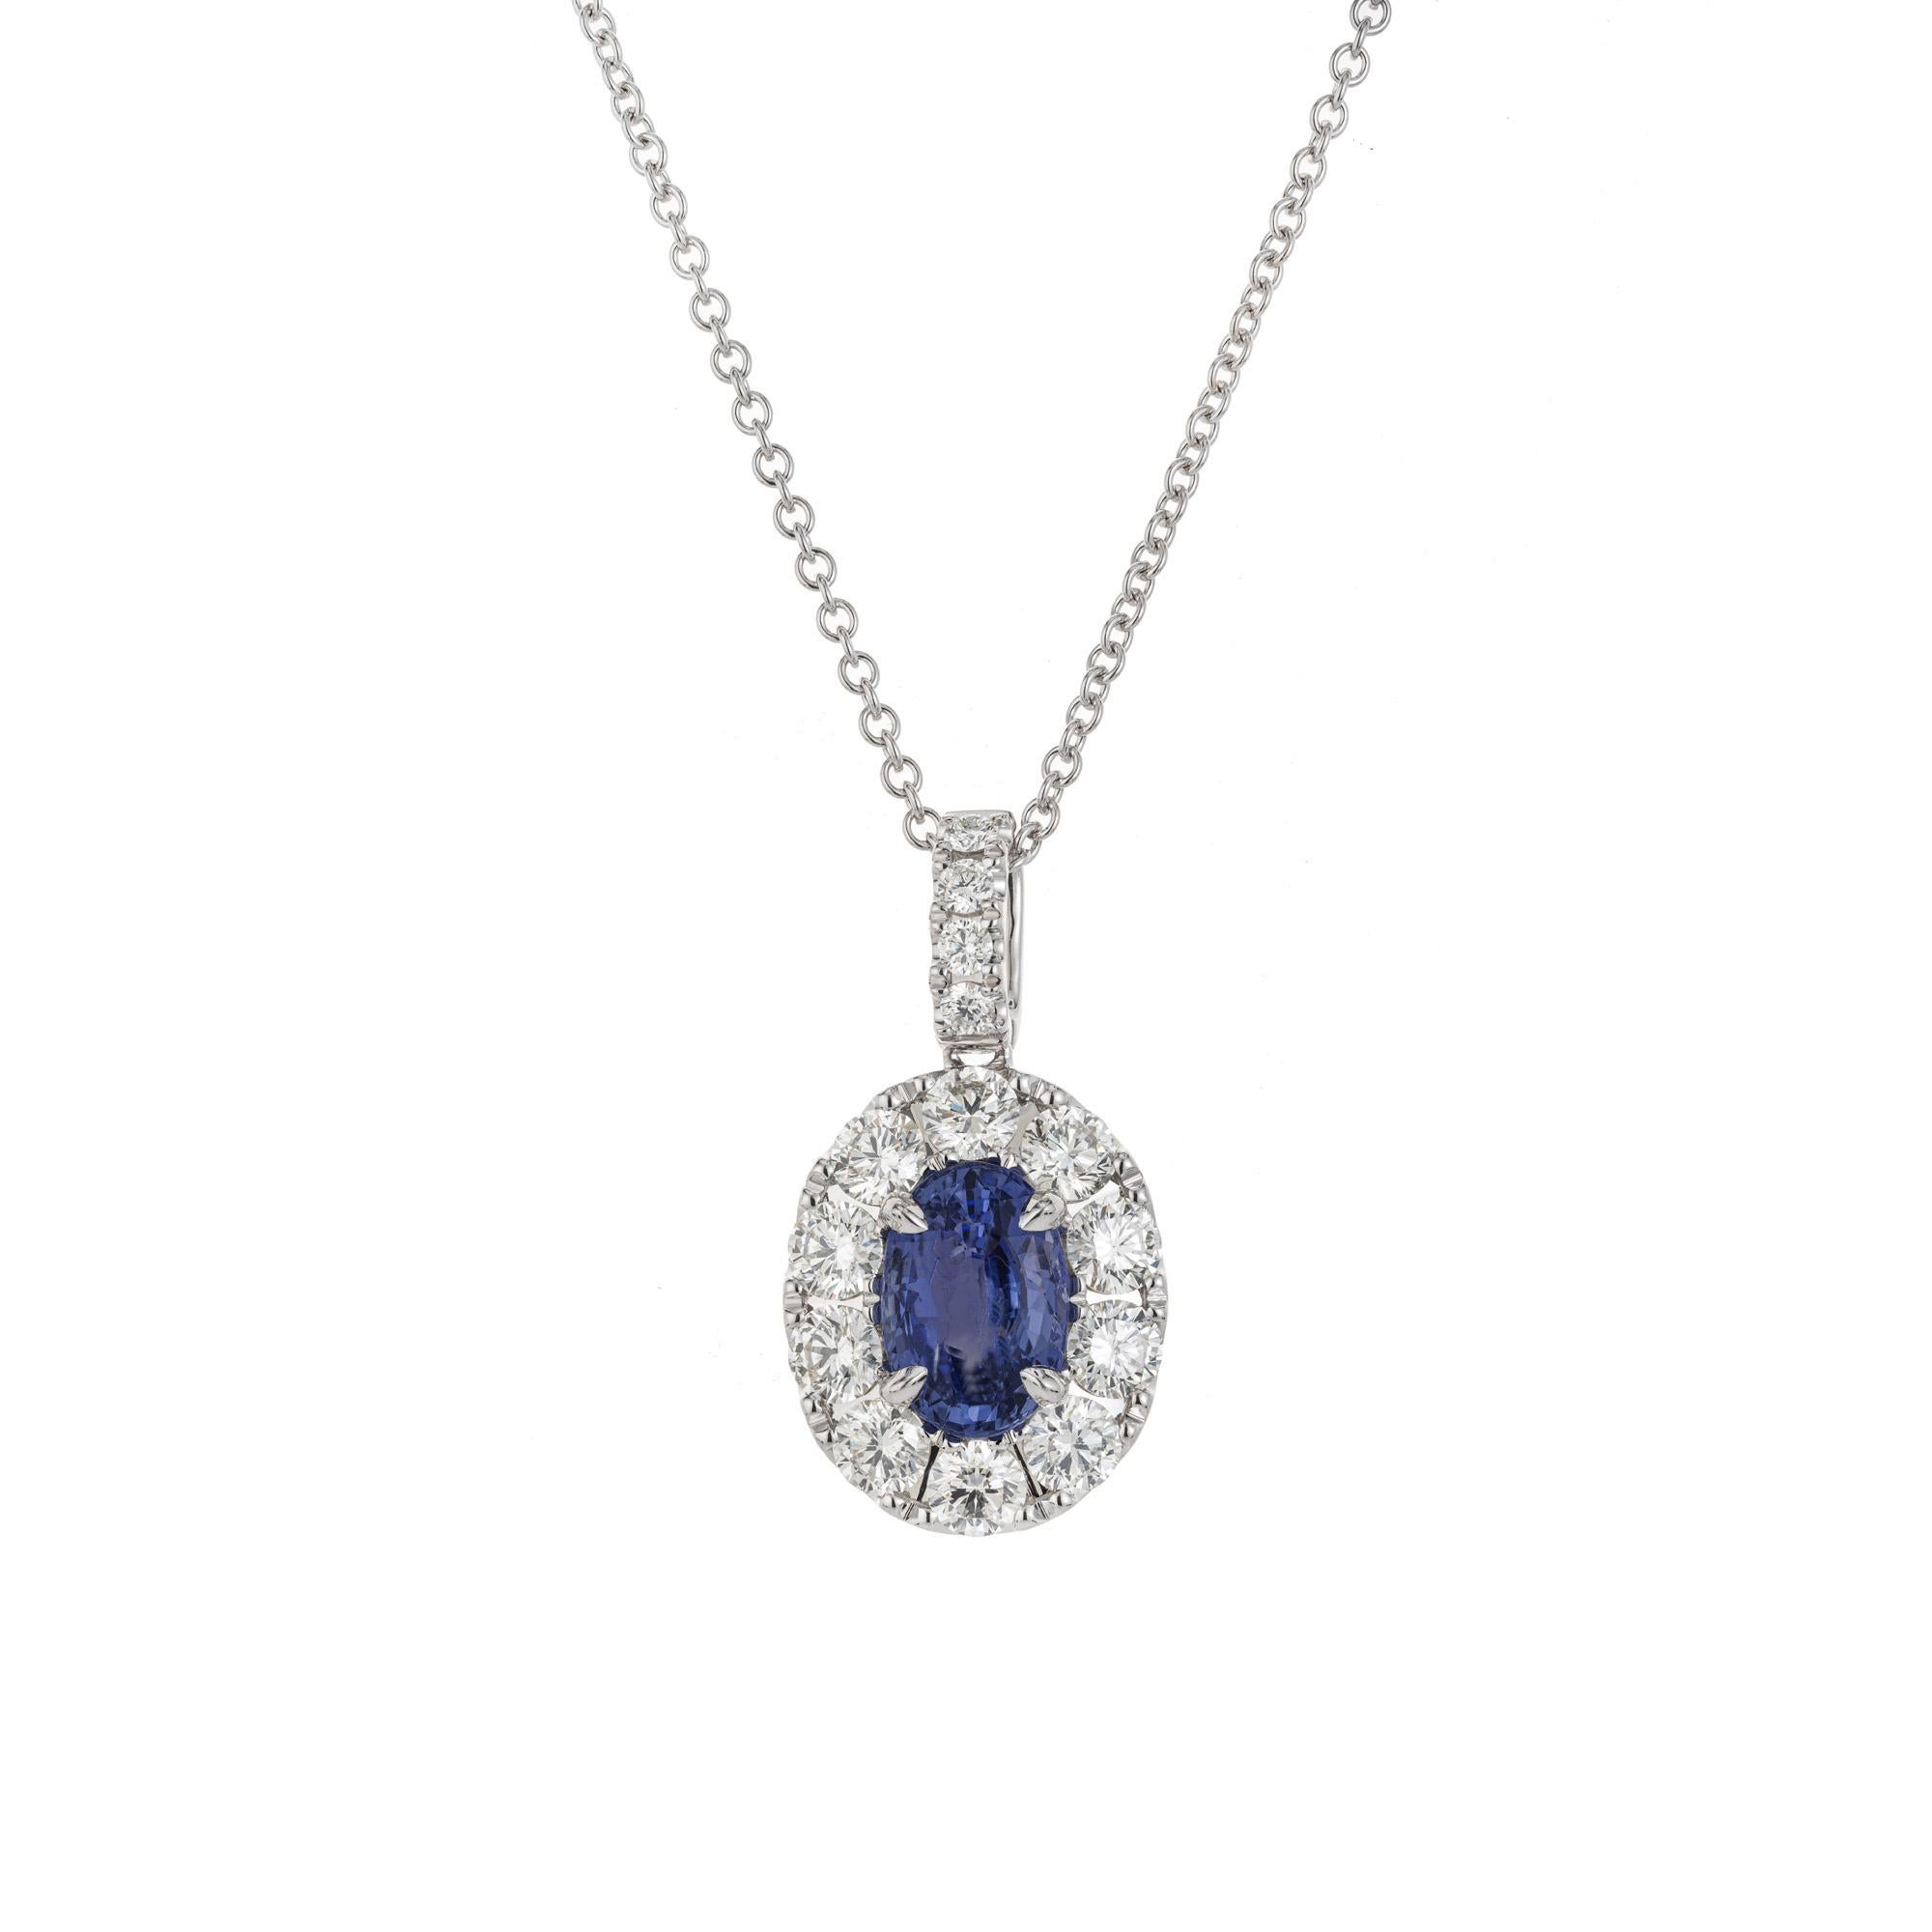 Beautiful sapphire and diamond pedant necklace. FGL Certified 3.04 carat oval blue natural no heat sapphire mounted in an 18k white gold setting with a halo of round brilliant cut diamonds, accented with diamonds along the bail with a total carat